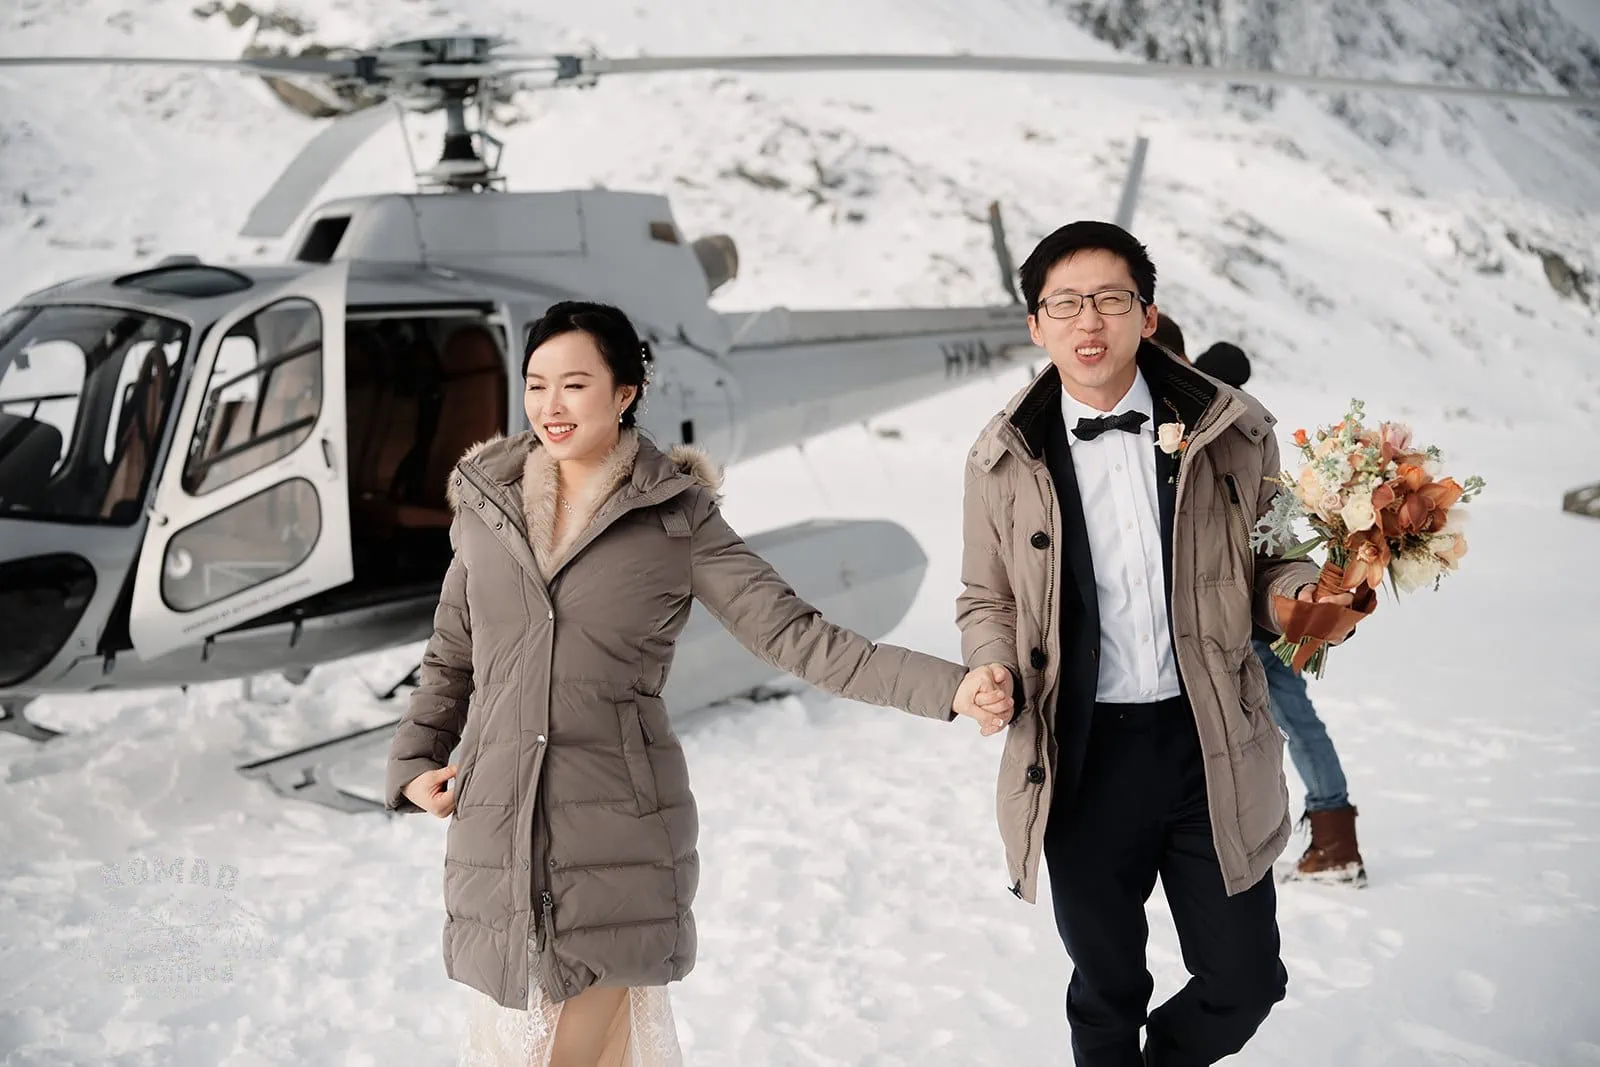 Joanna and Tony share a loving moment during their Pre-wedding Shoot in Queenstown, New Zealand, as they hold hands in front of a helicopter.